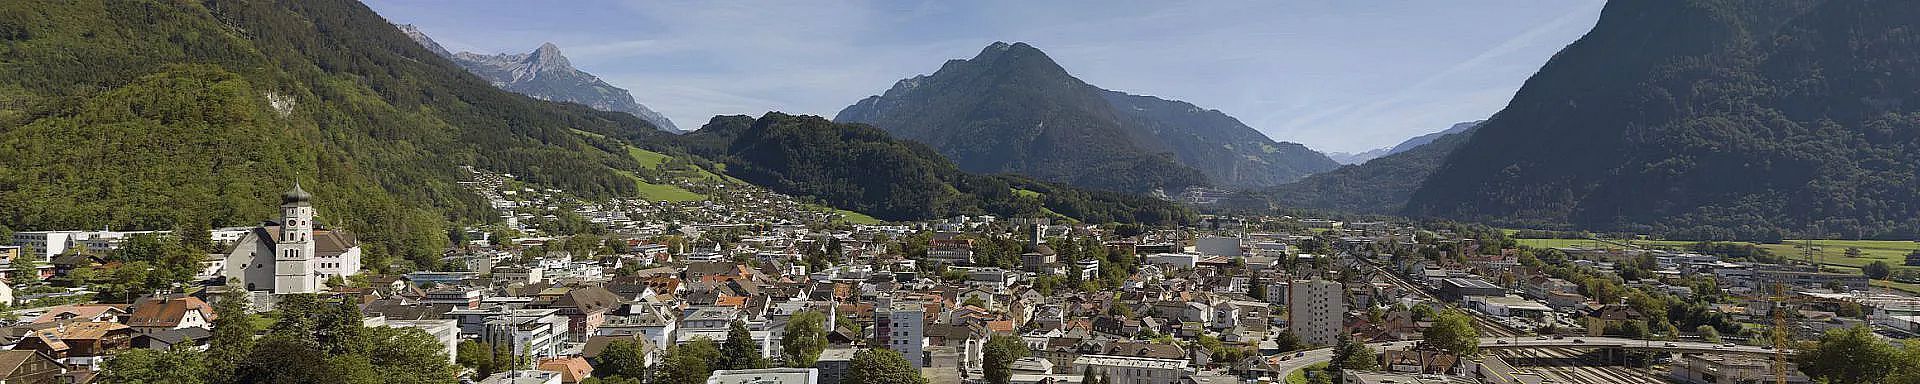 bludenz-sommer-ort-panorama